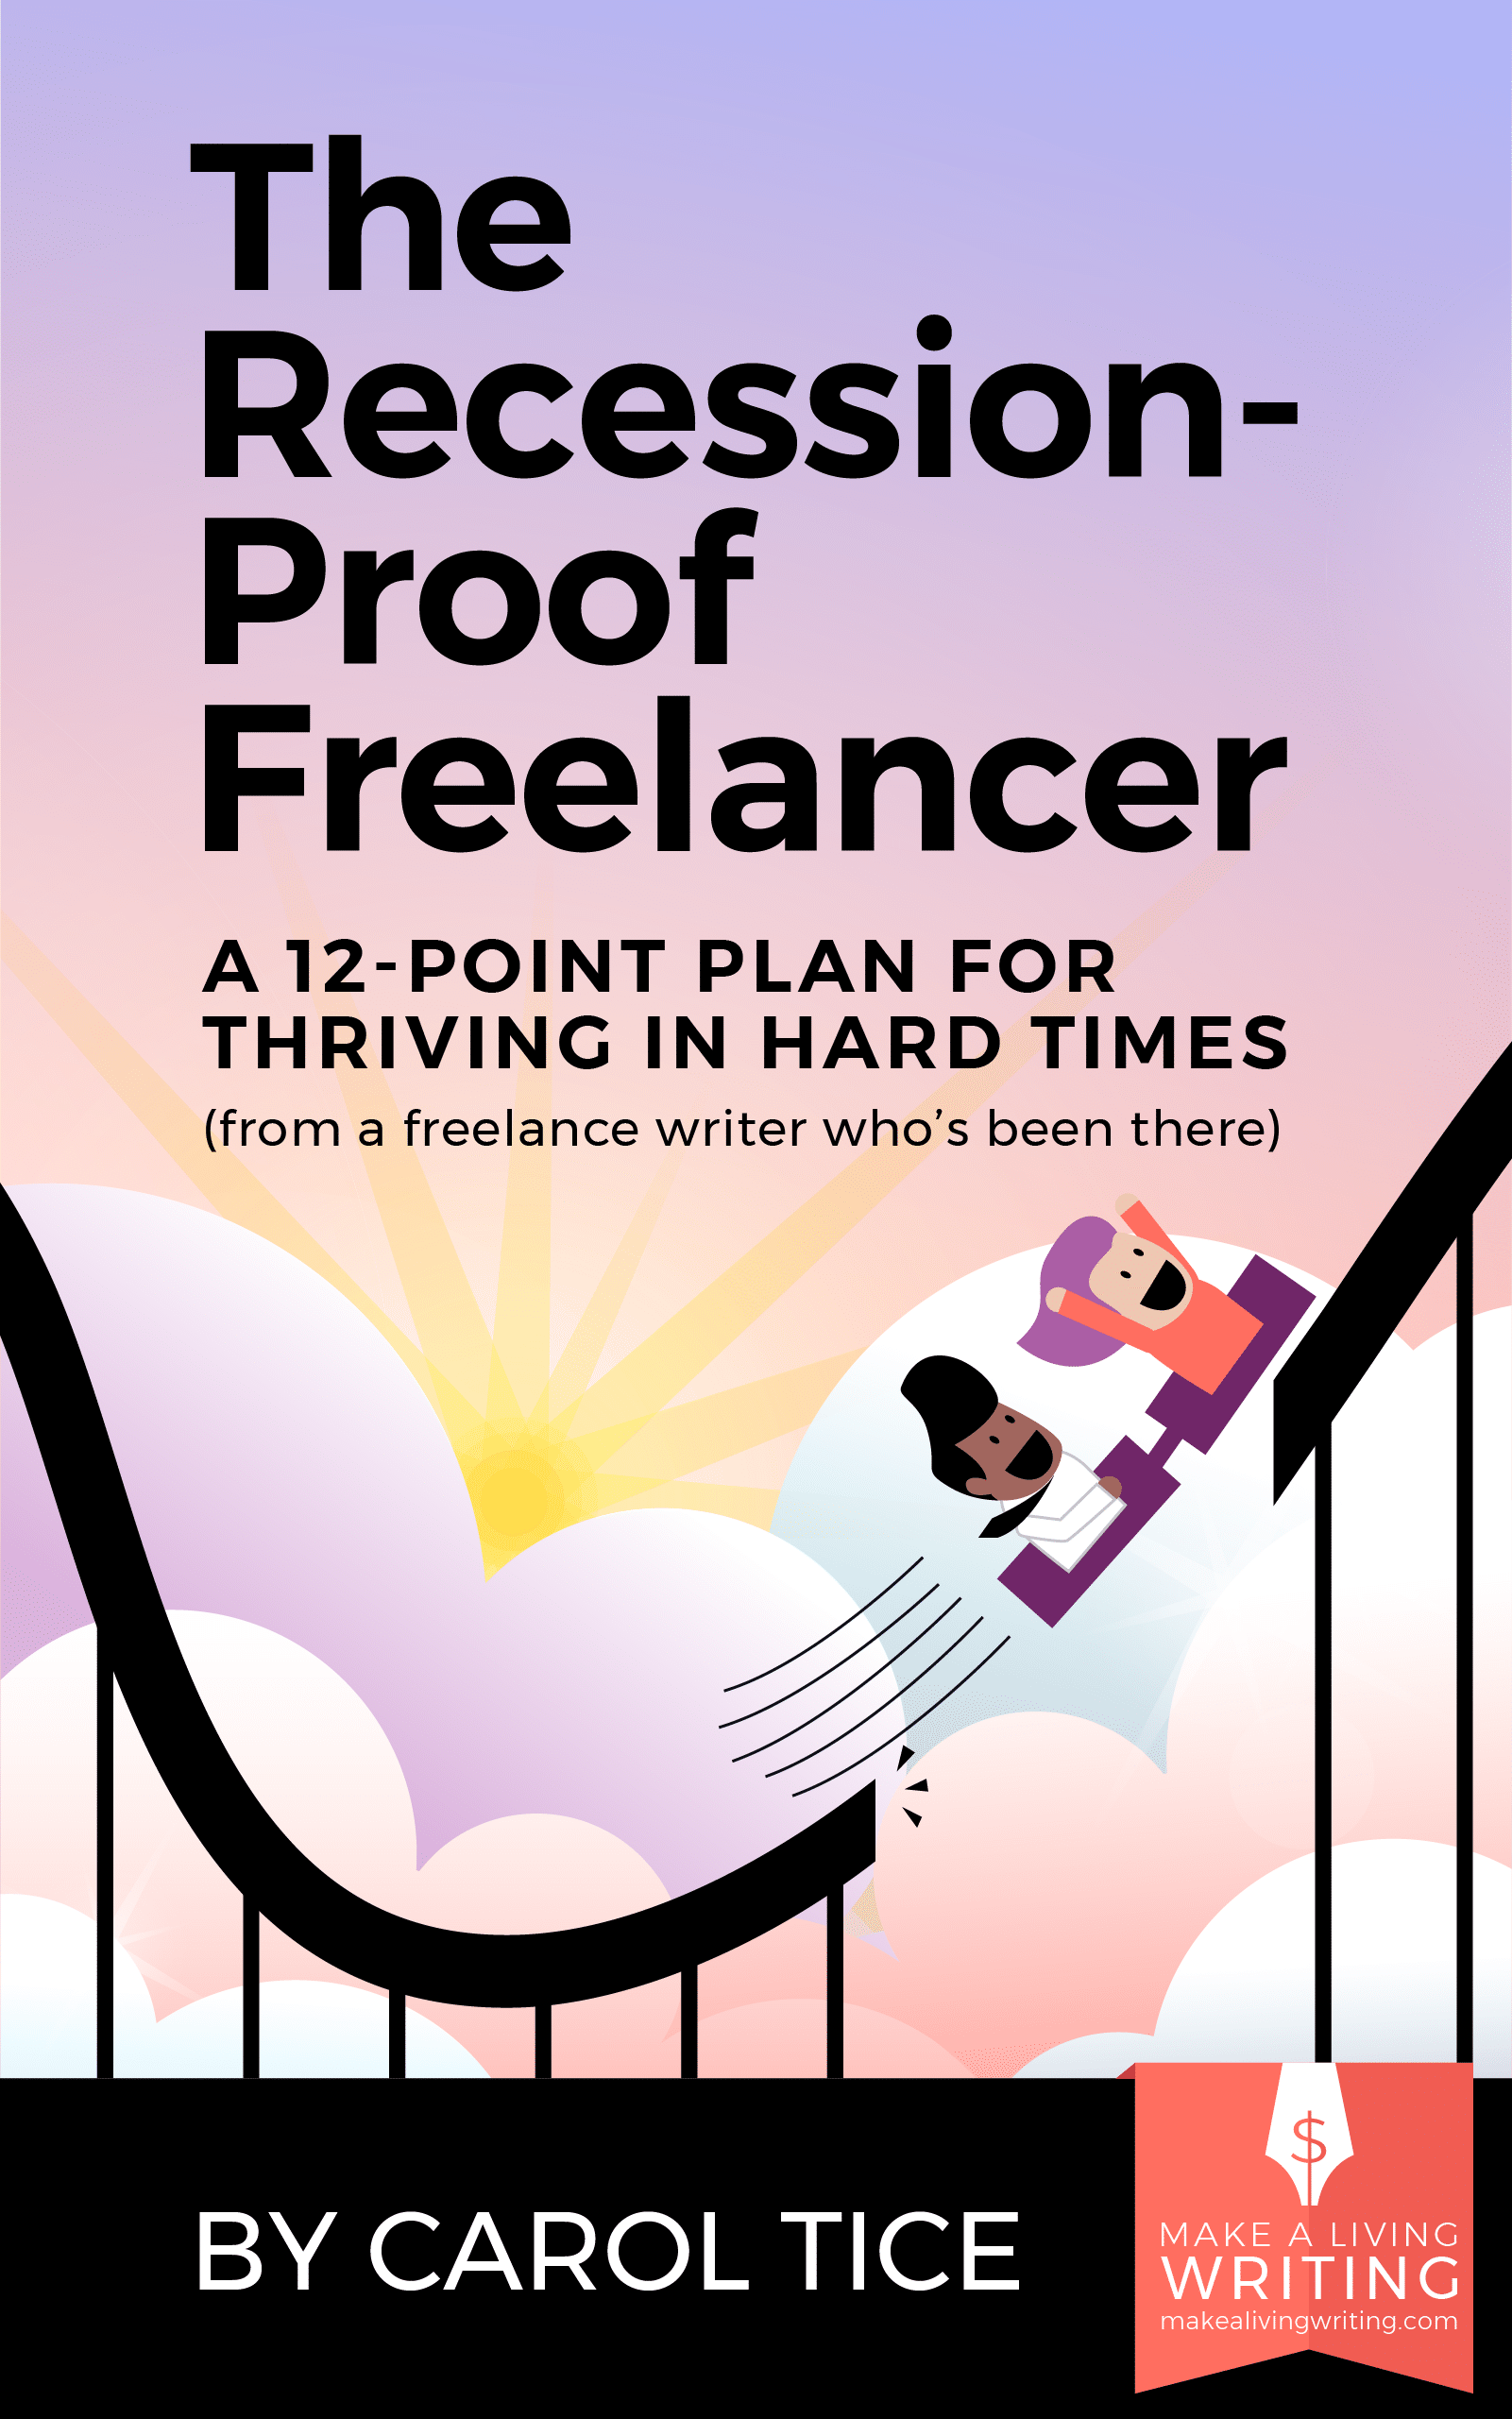 The Recession Proof Freelancer: A 12-Point Plan for Thriving in Hard Times (from a freelance writer who's been there) By Carol Tice